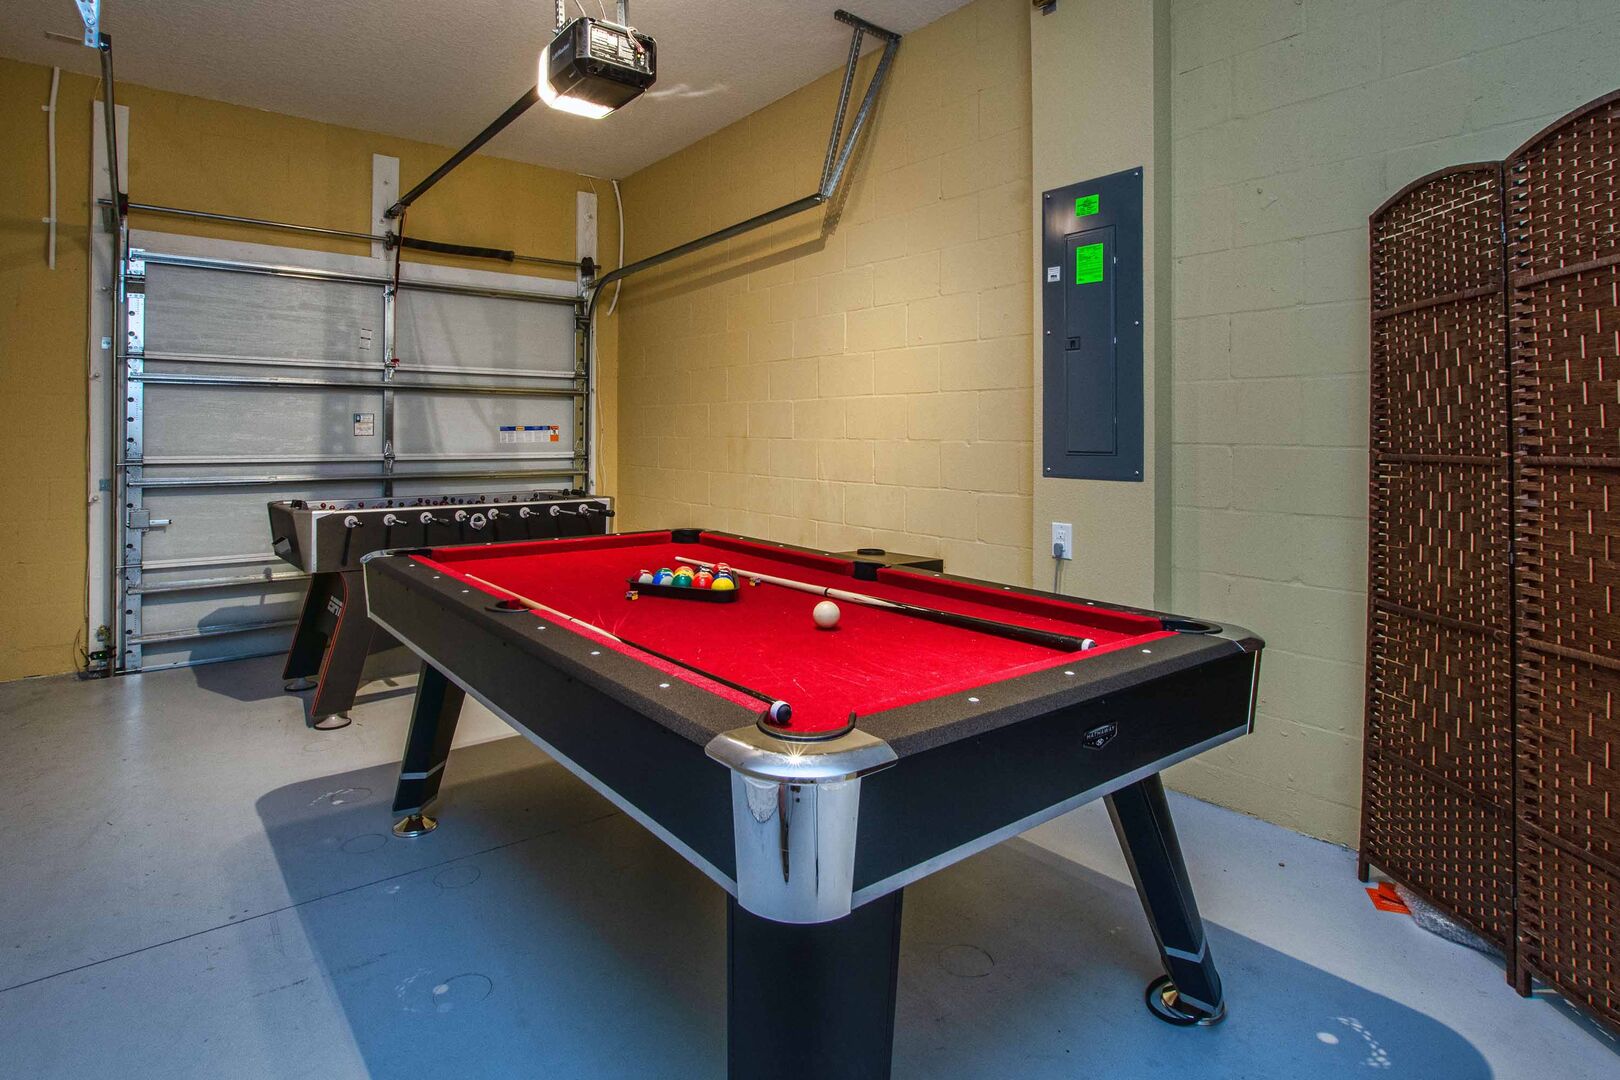 Game Room for everyone to have fun!